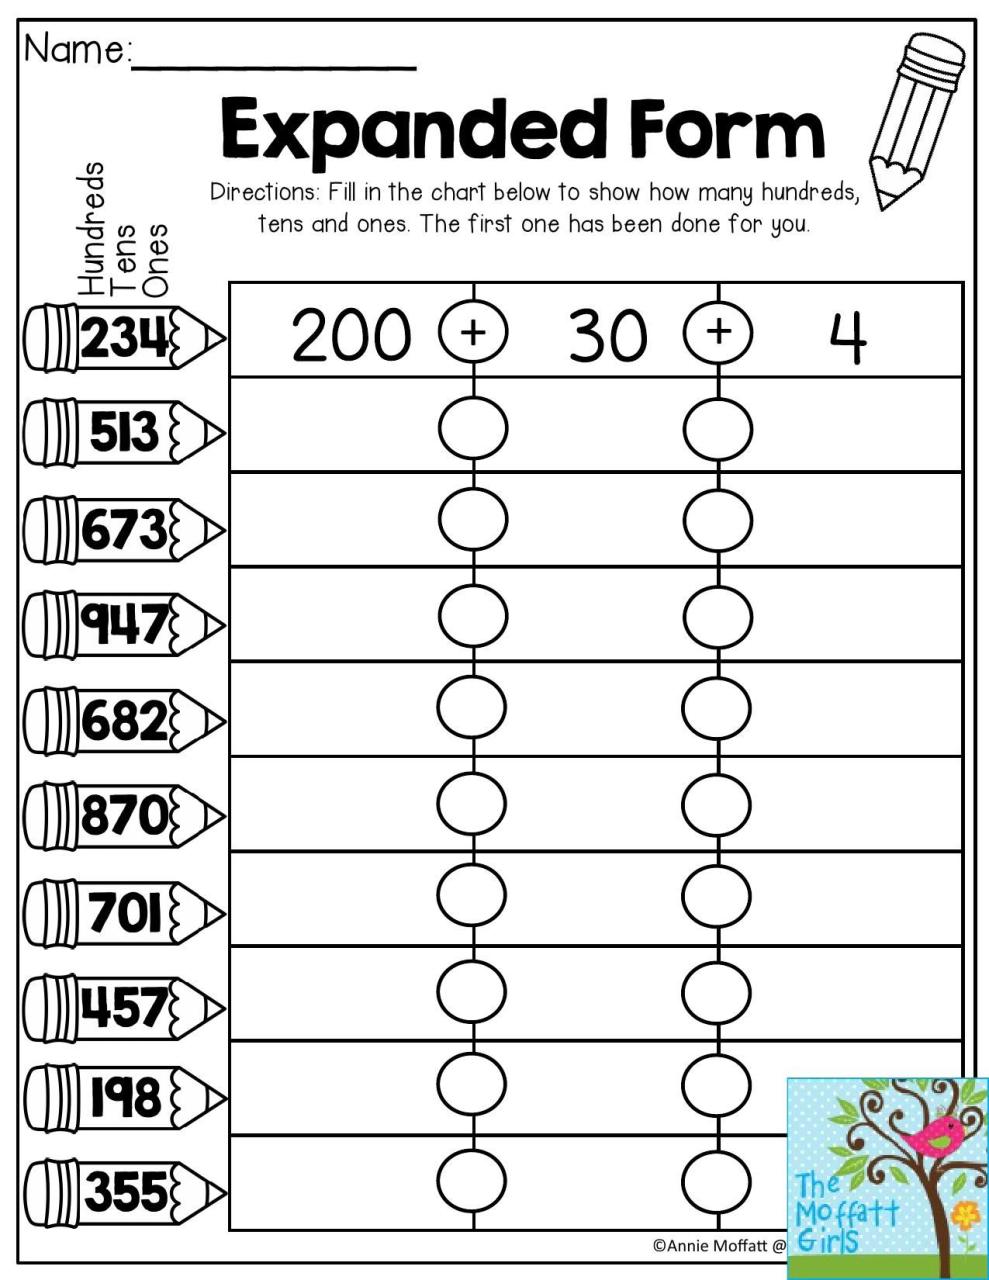 Hundreds Tens And Ones Worksheets